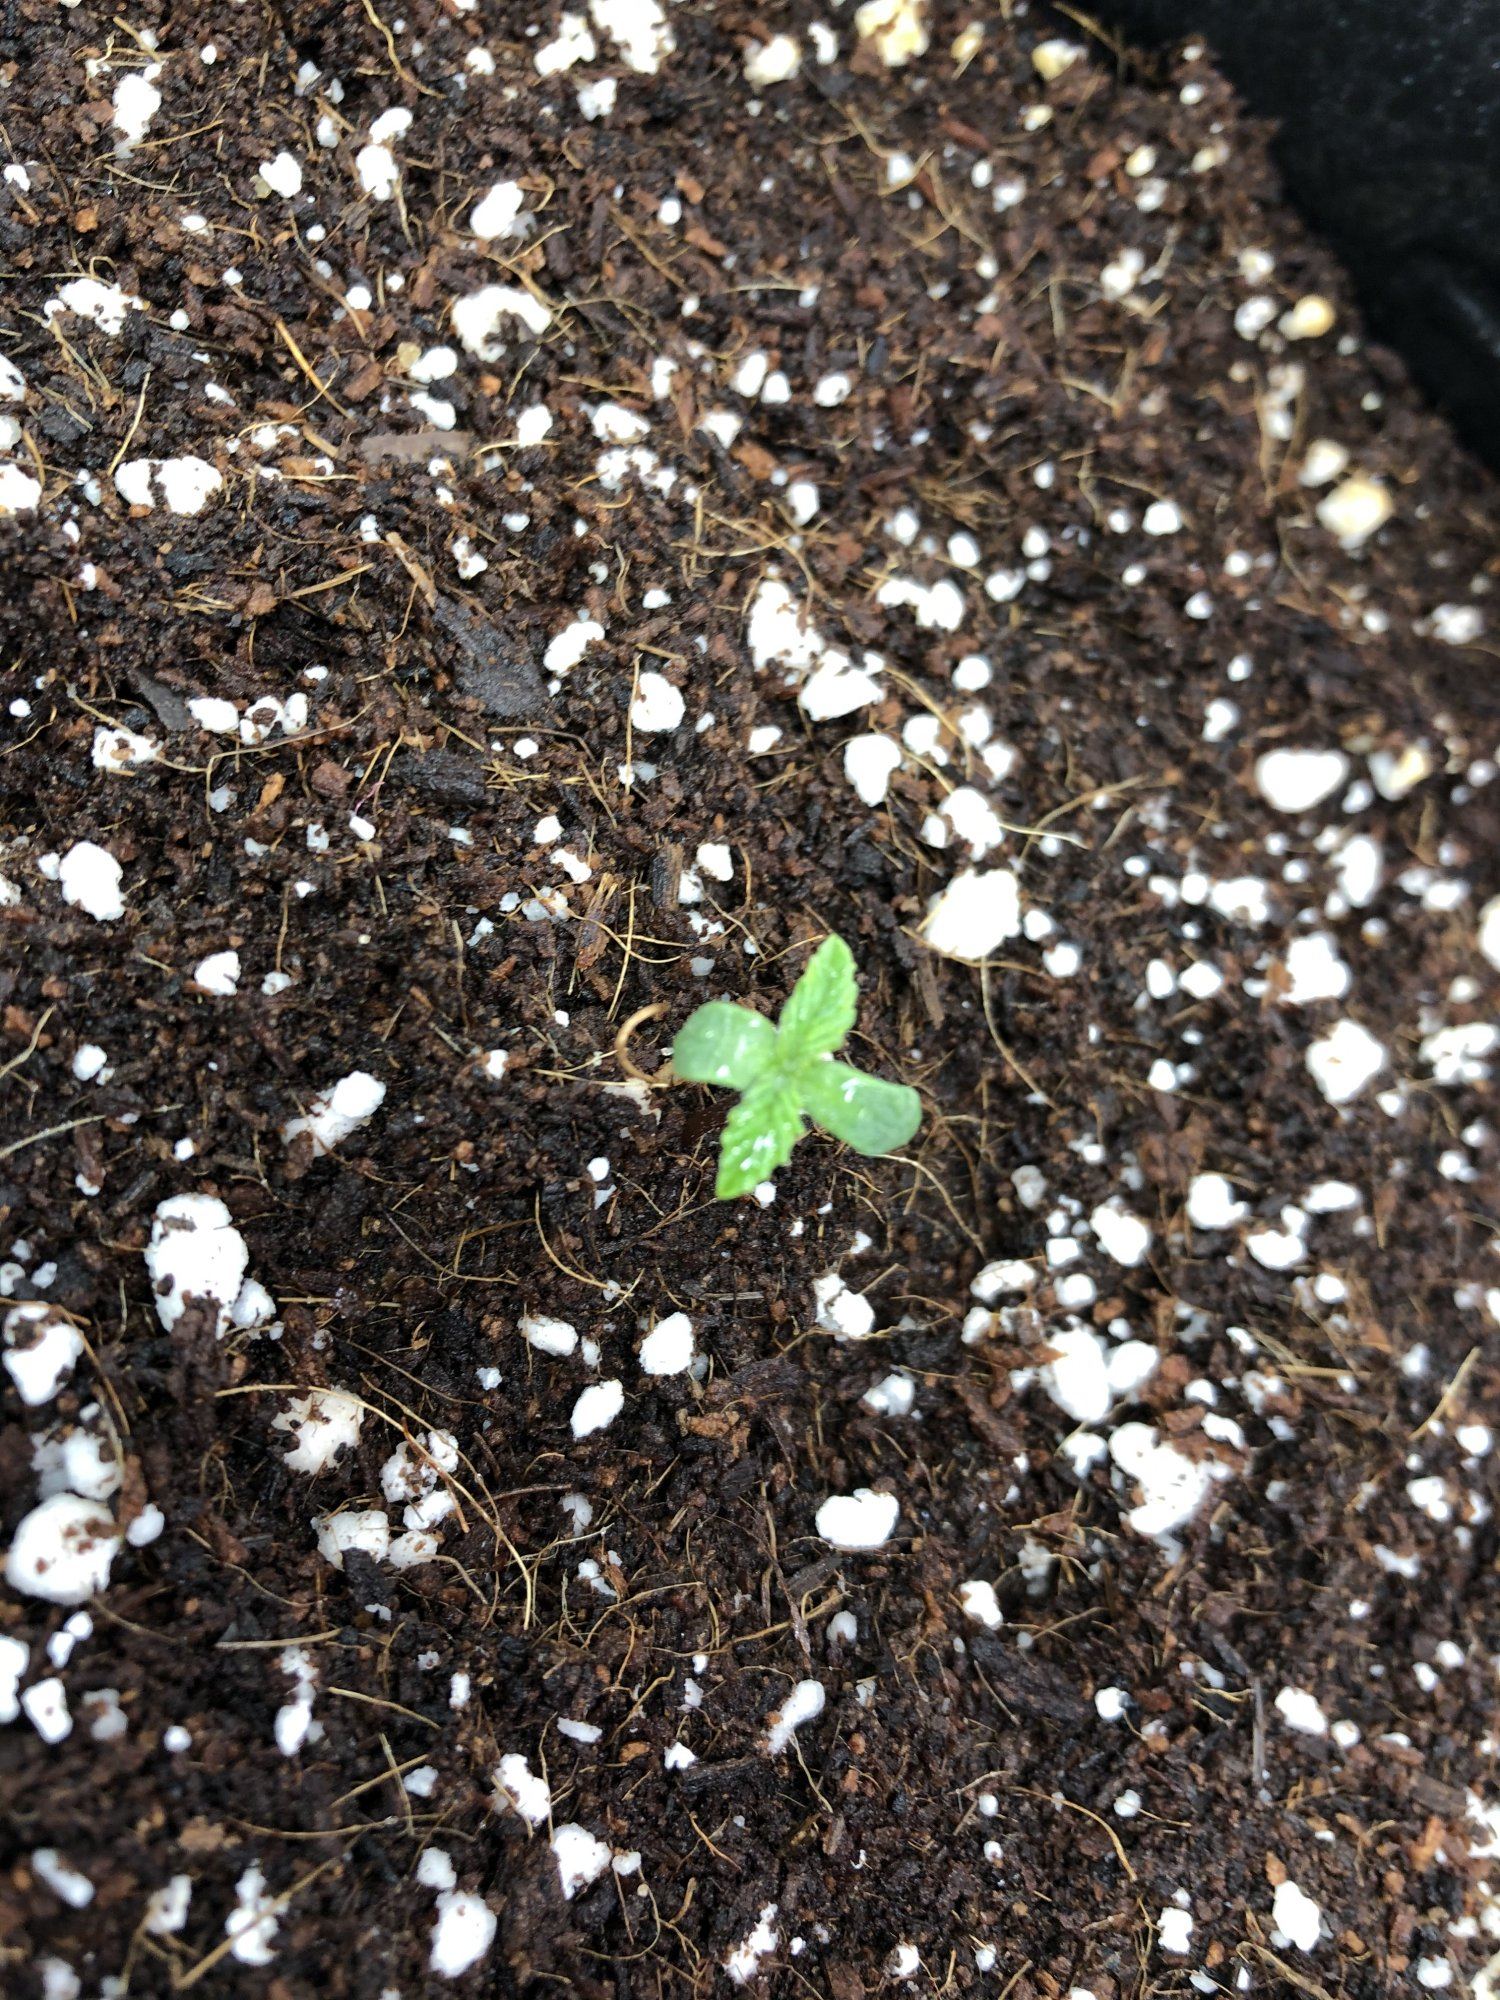 Not sure whats good with new seedling 3